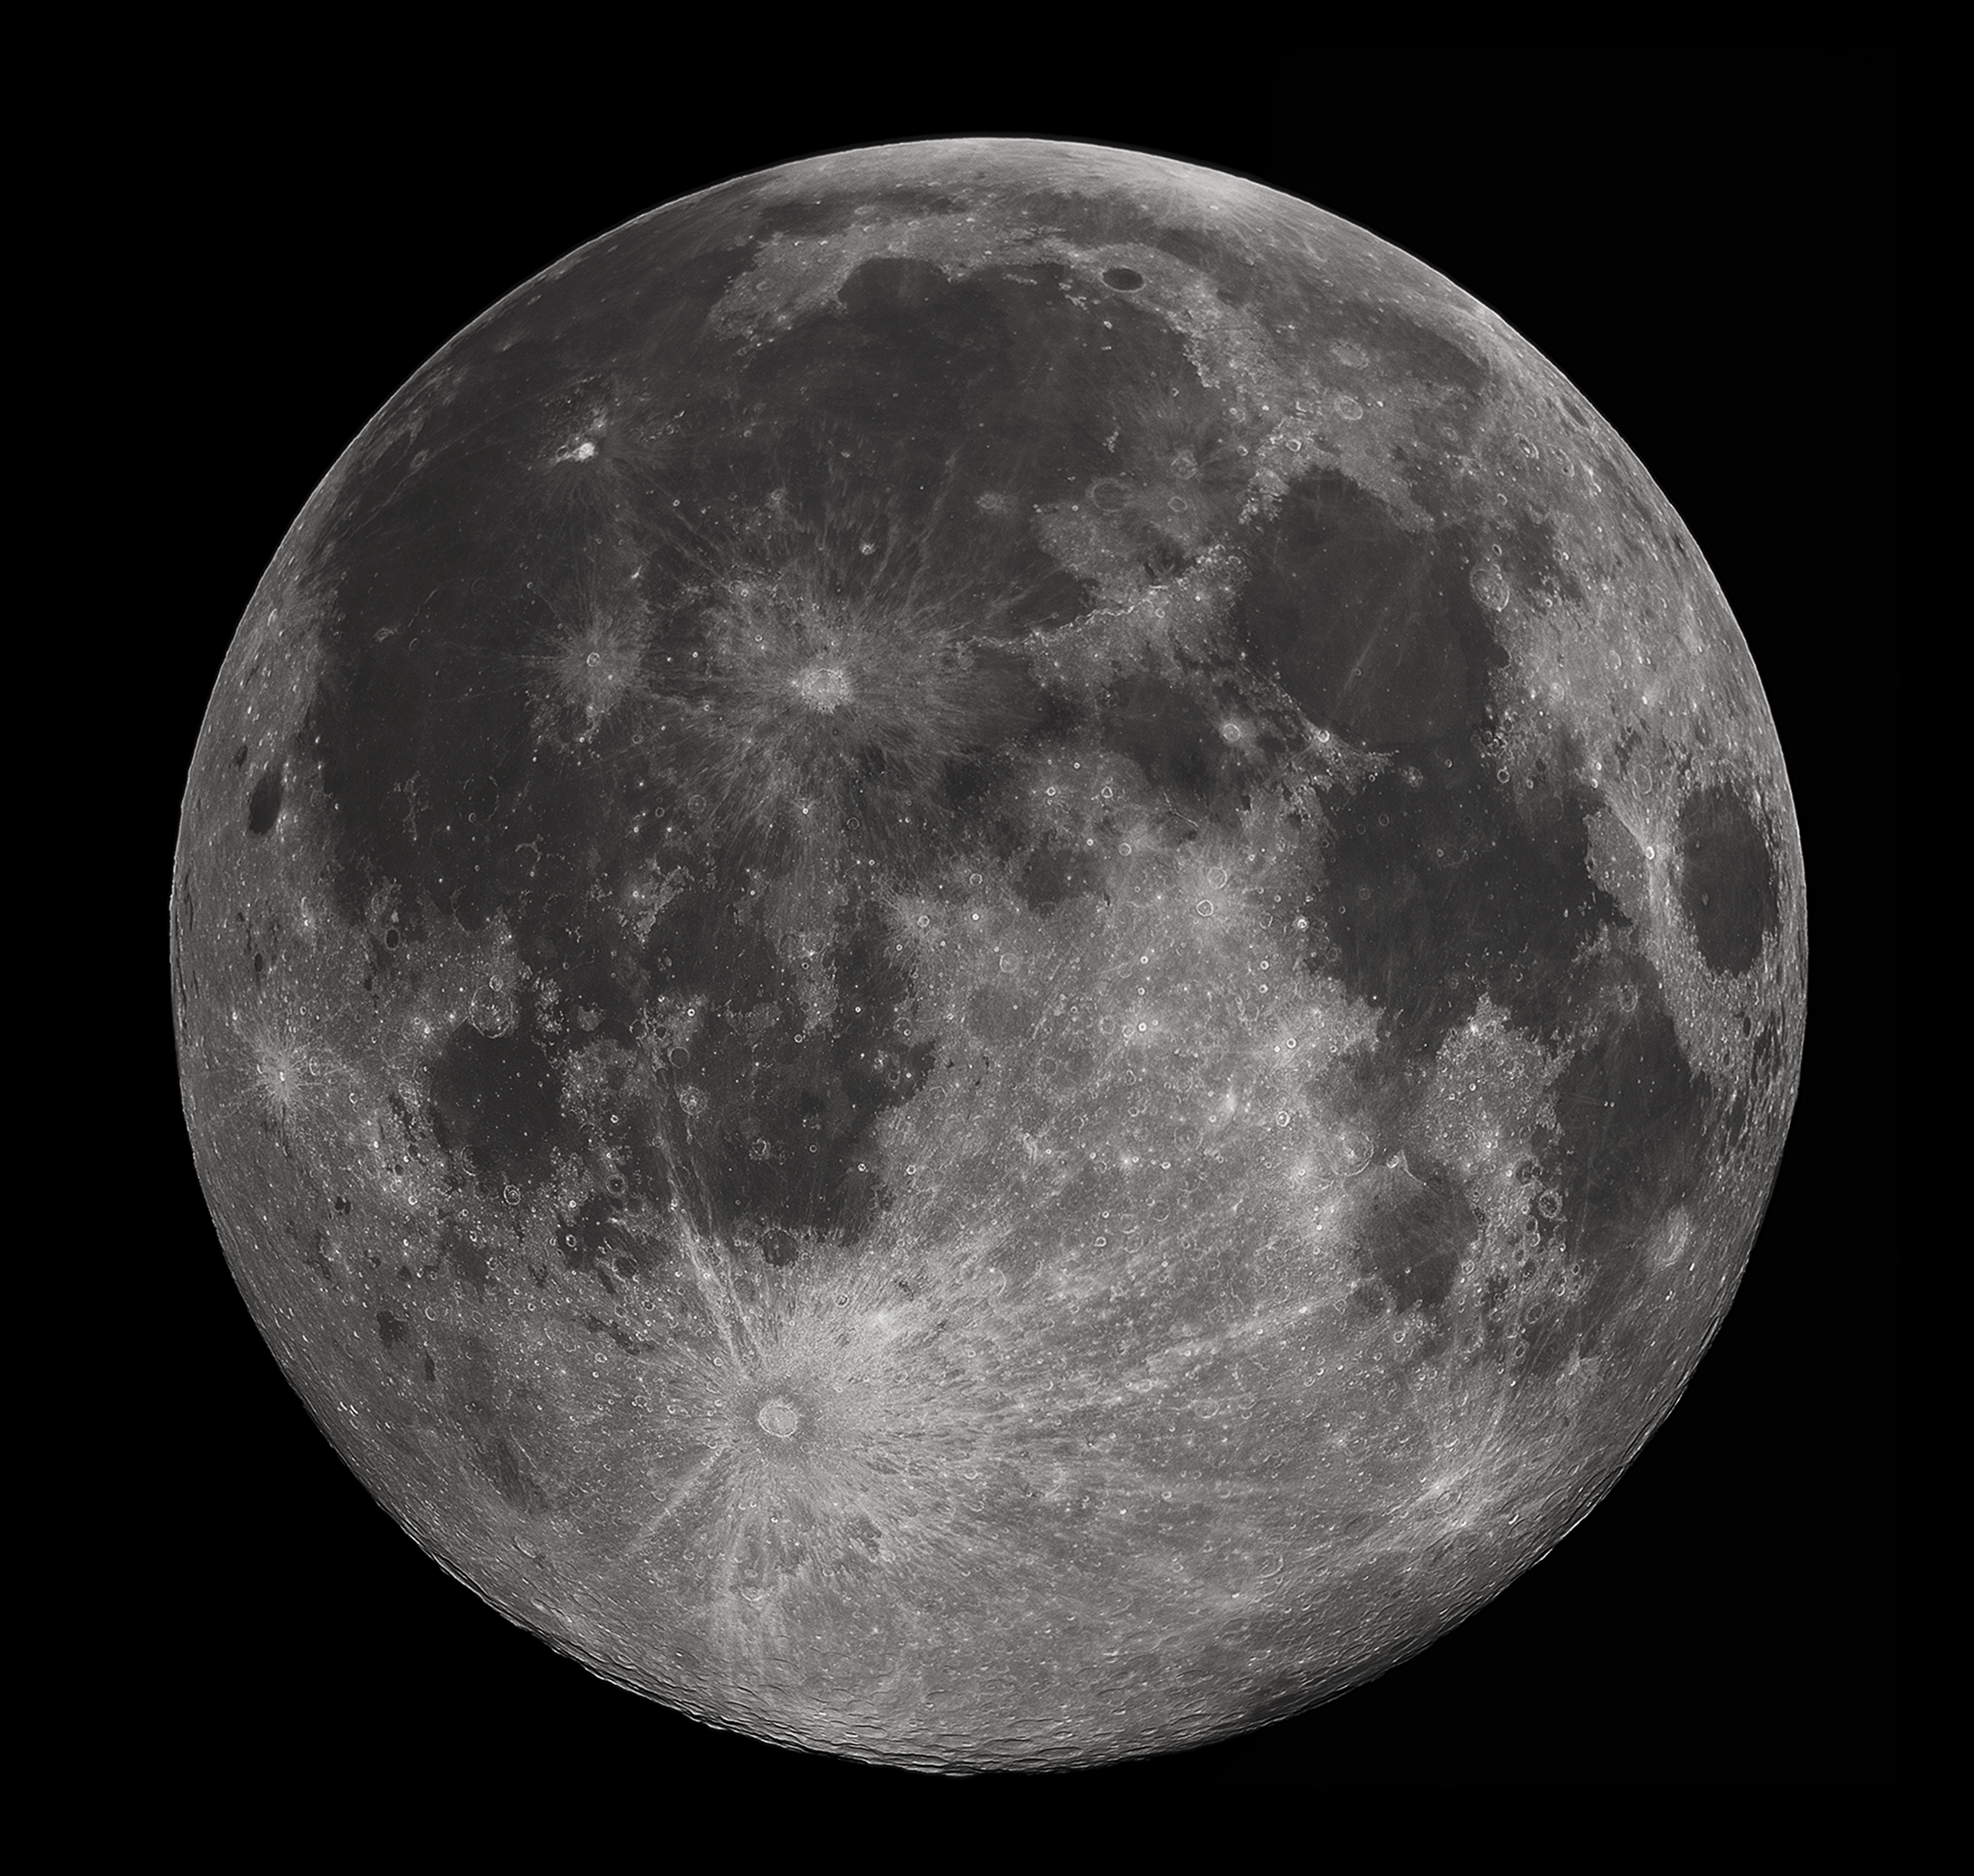 The near side of the Moon that always faces the Earth. https://commons.wikimedia.org/wiki/File:FullMoon2010.jpg